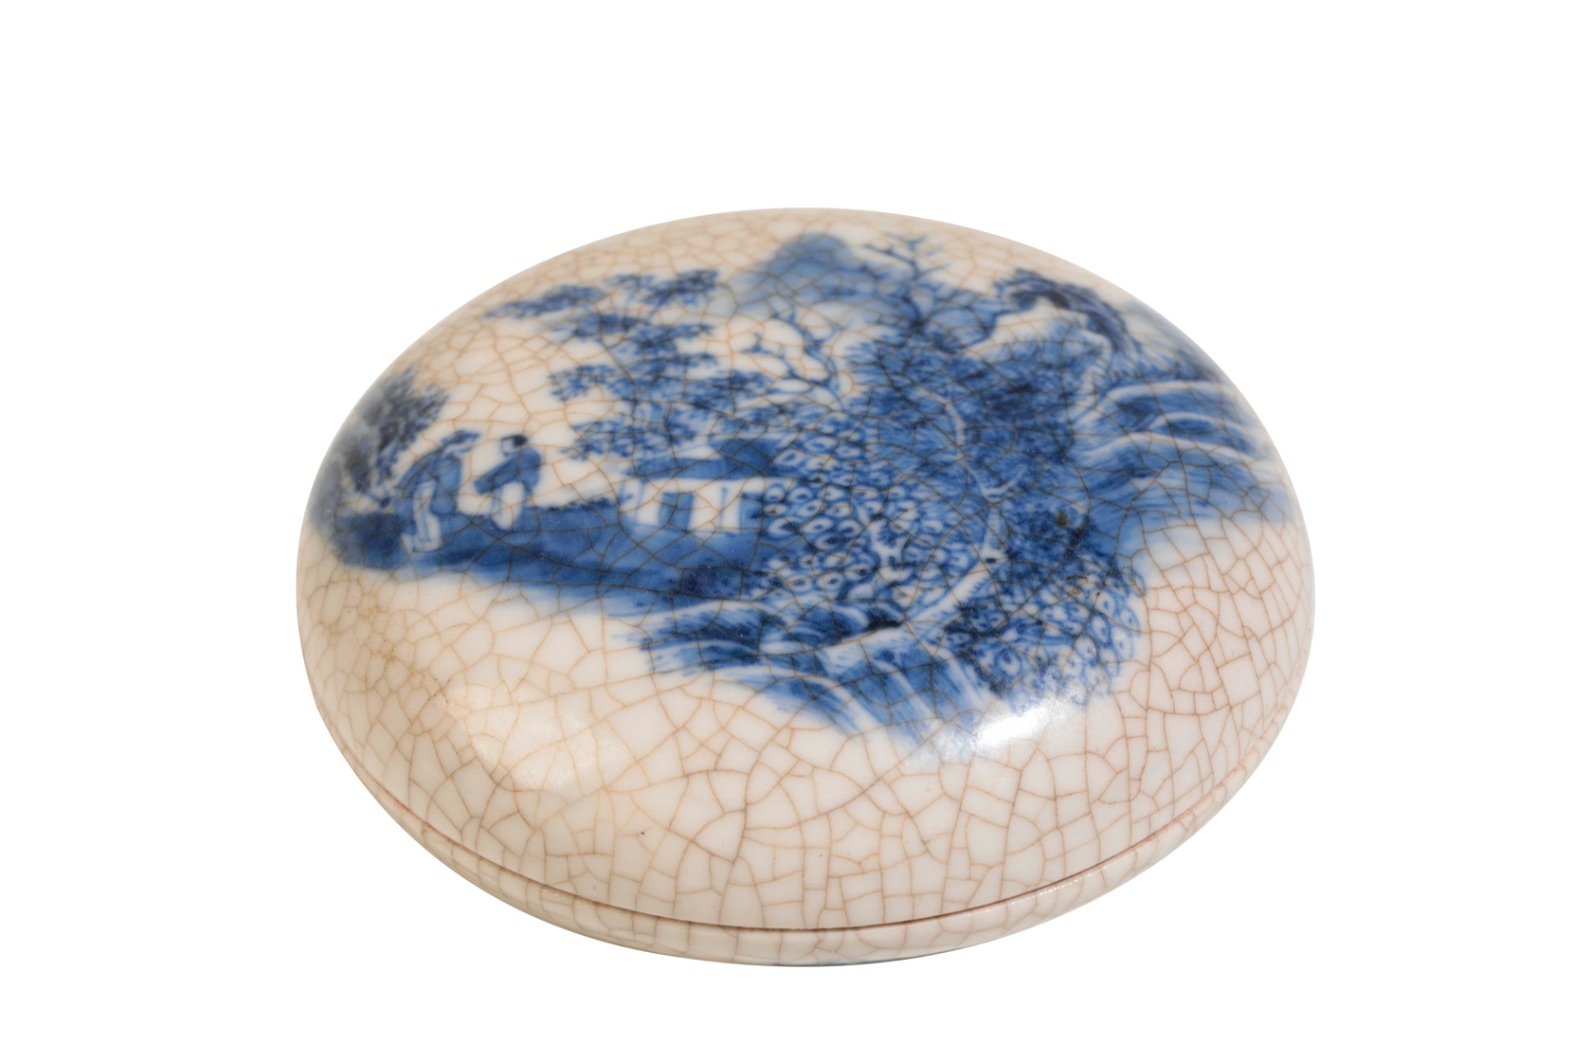 SOFT-PASTE BLUE AND WHITE SEAL PASTE BOX, QING DYNASTY - Image 2 of 3